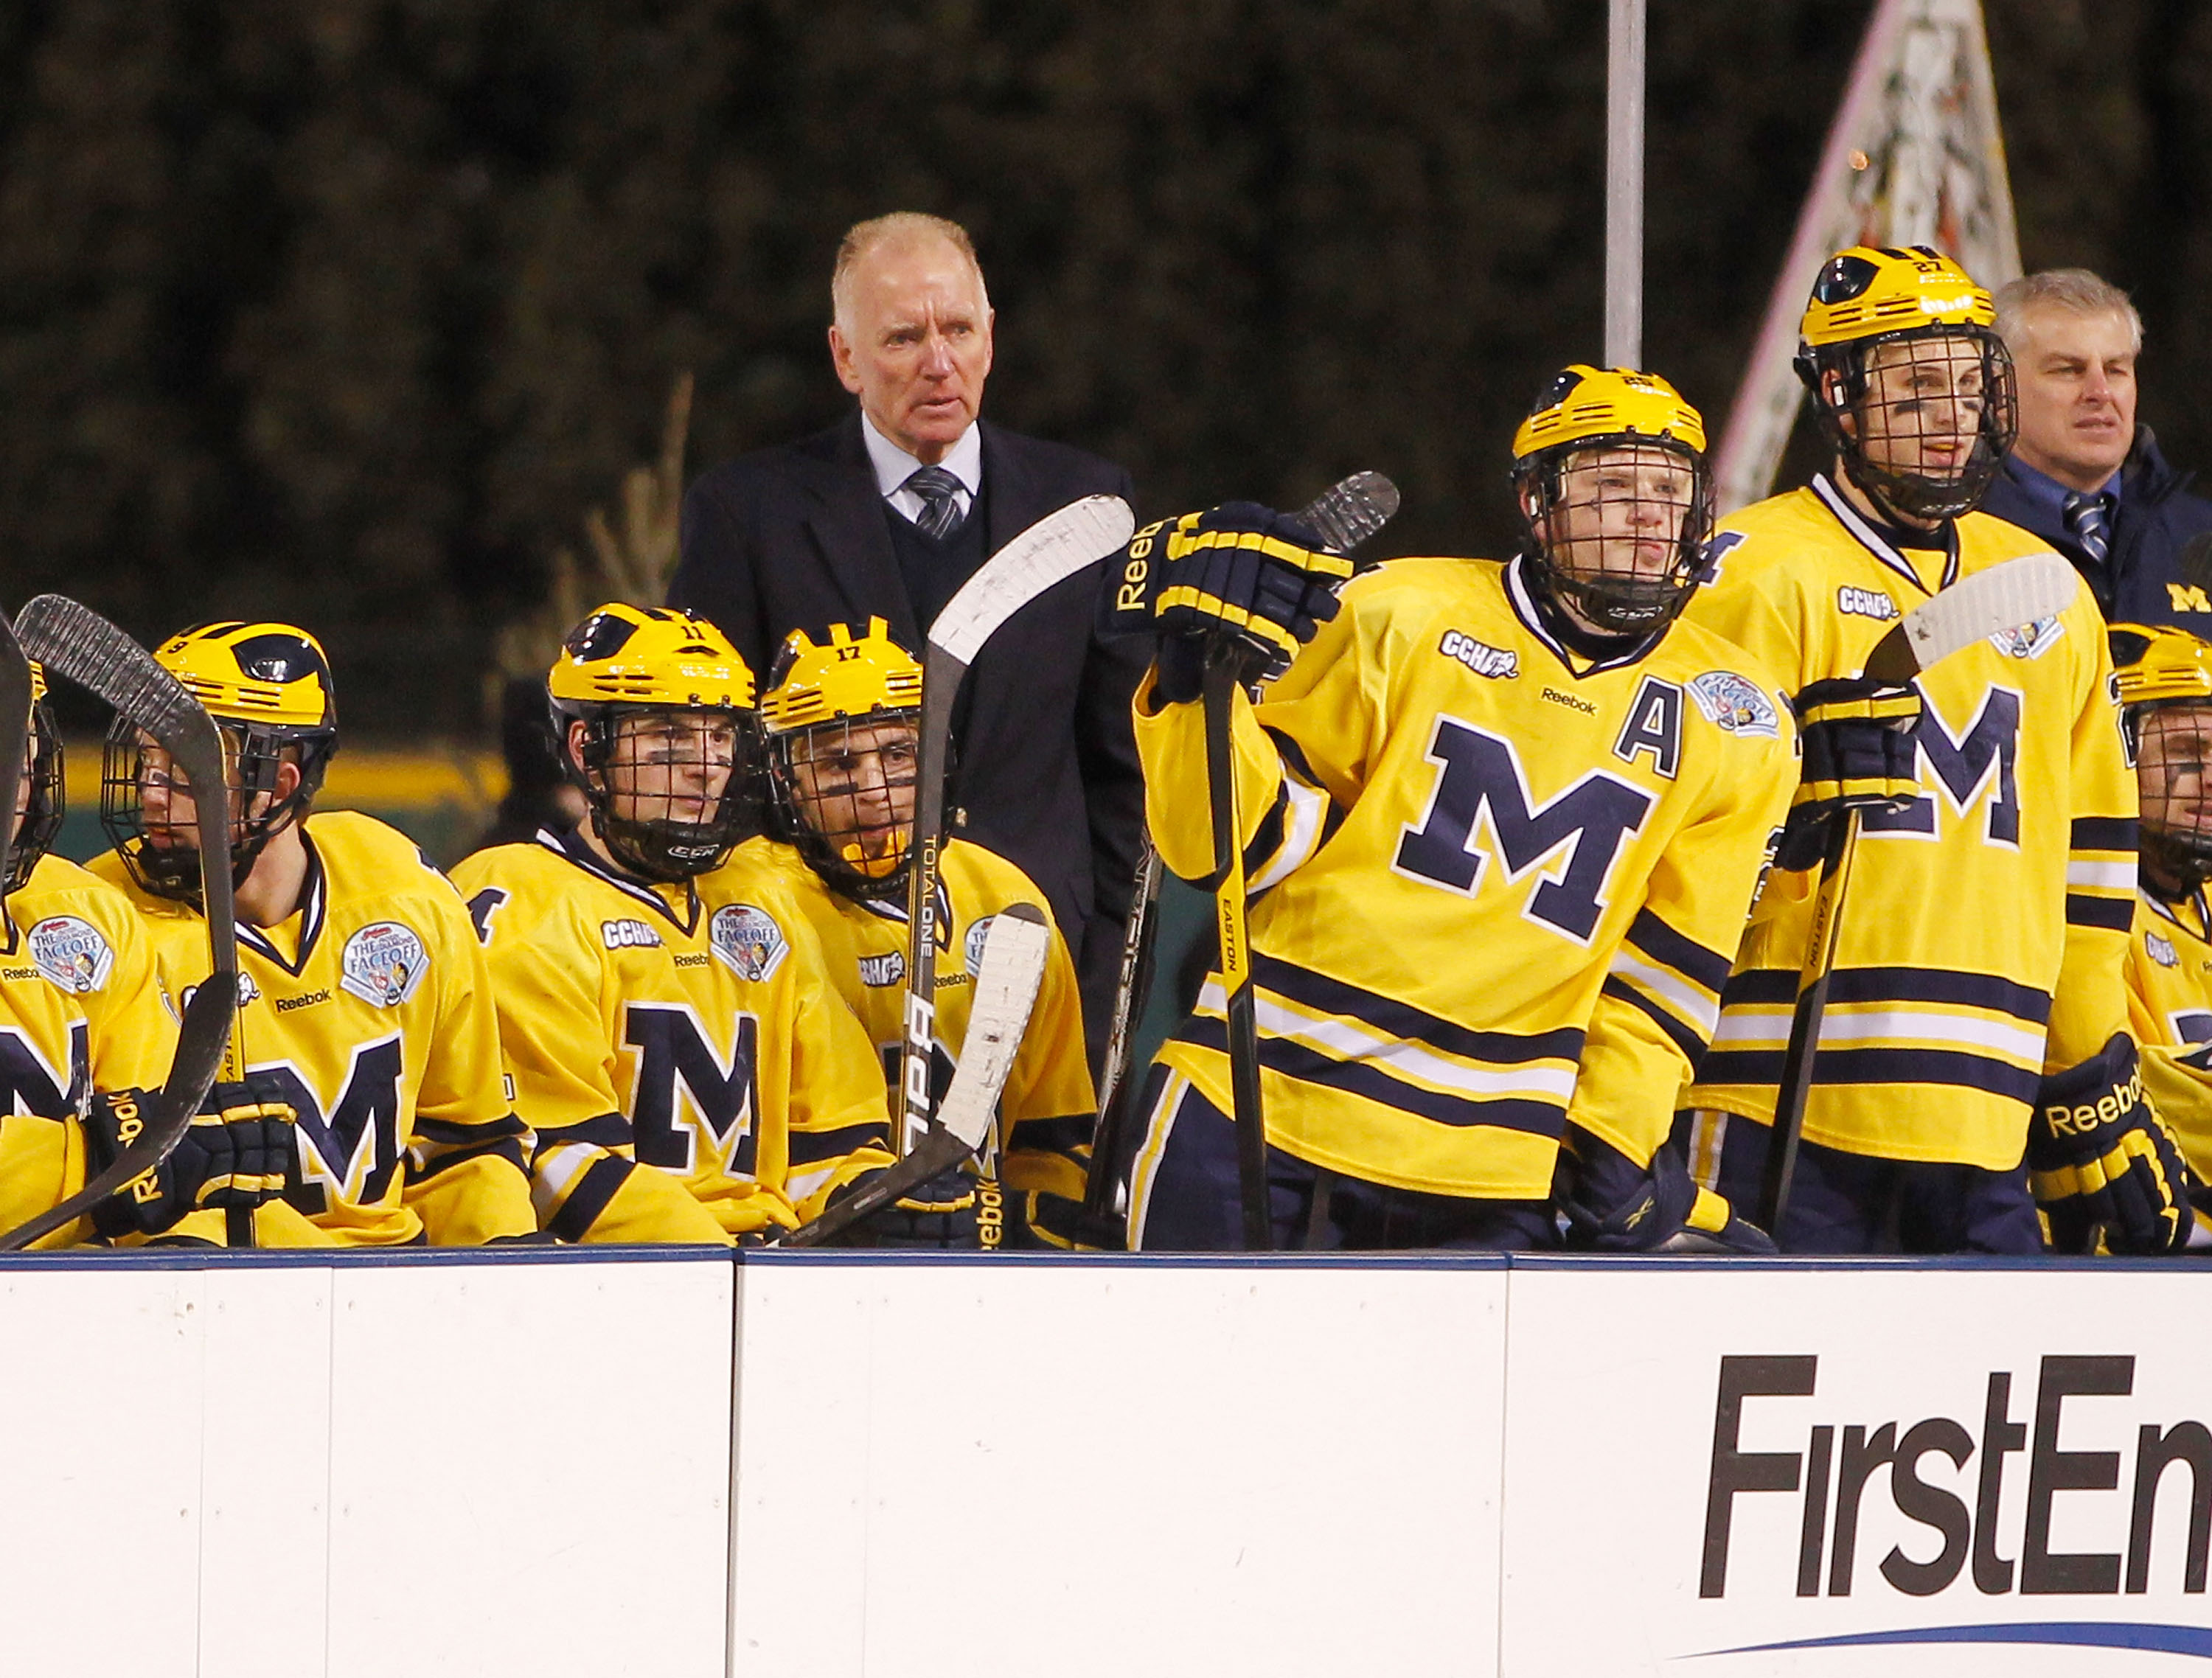 Red Berenson and the Wolverines lost a recruit to the OHL's London Knights.